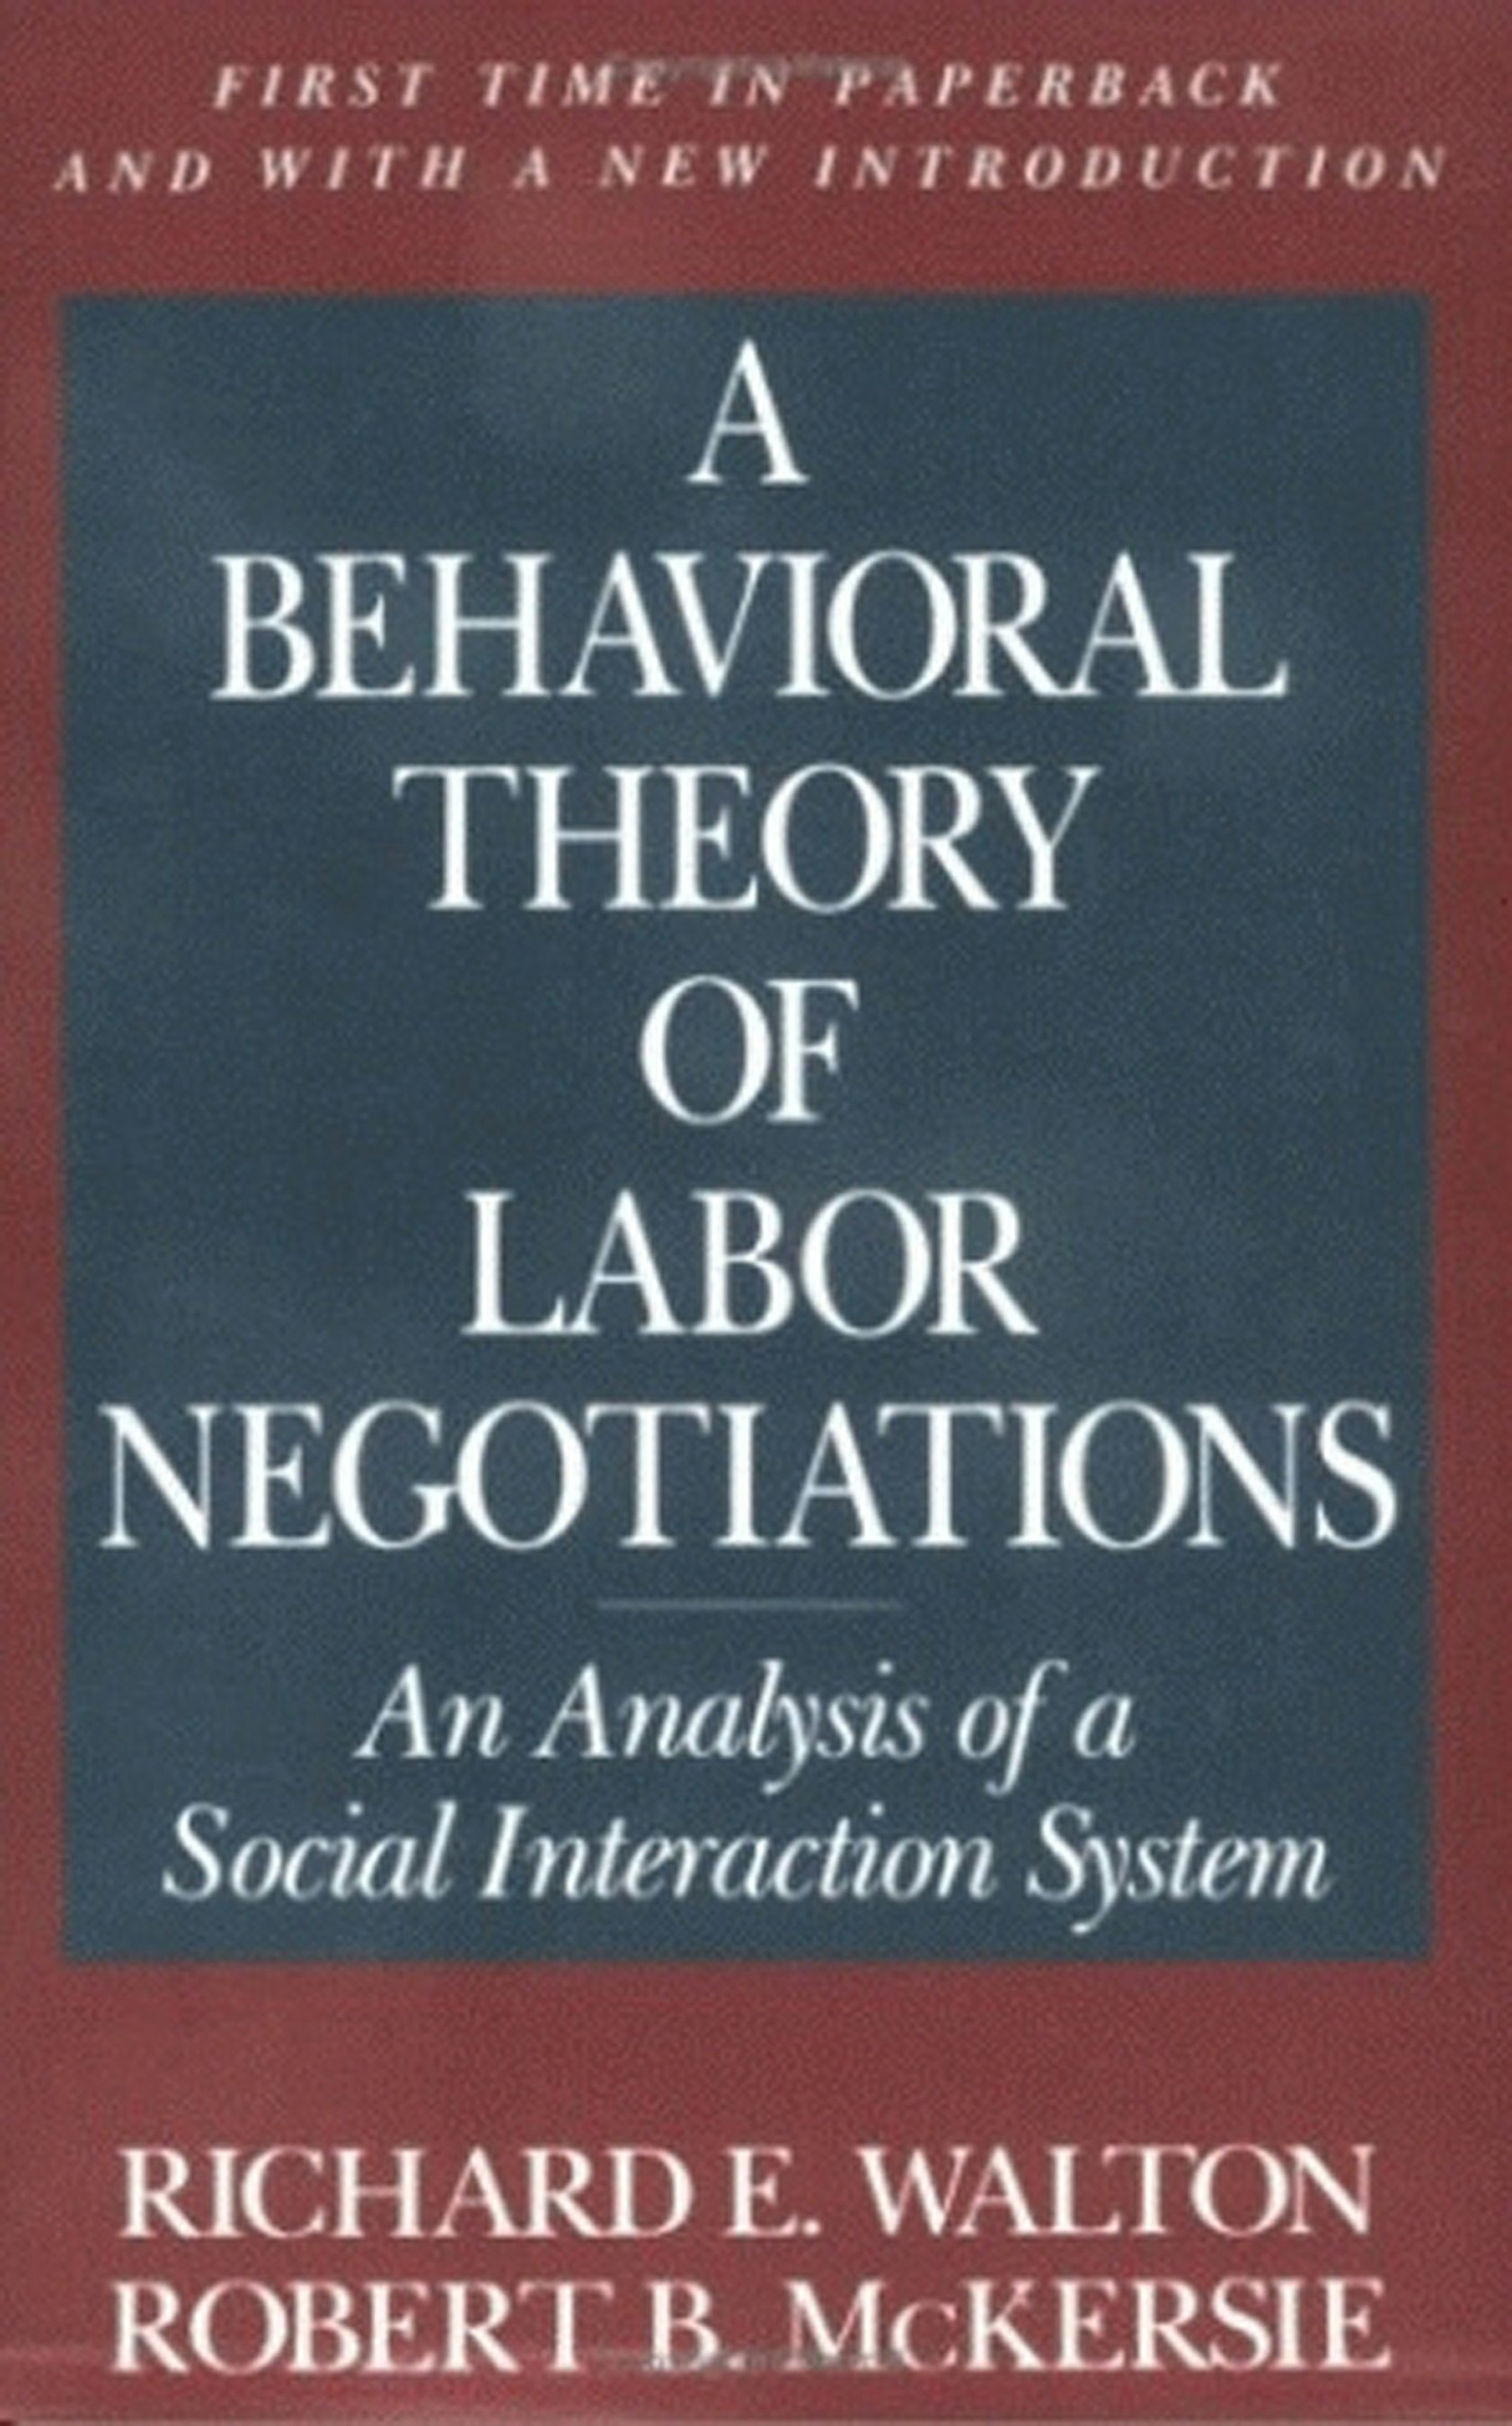 A Behavioral Theory of Labor Negotiations by Richard E. Walton and